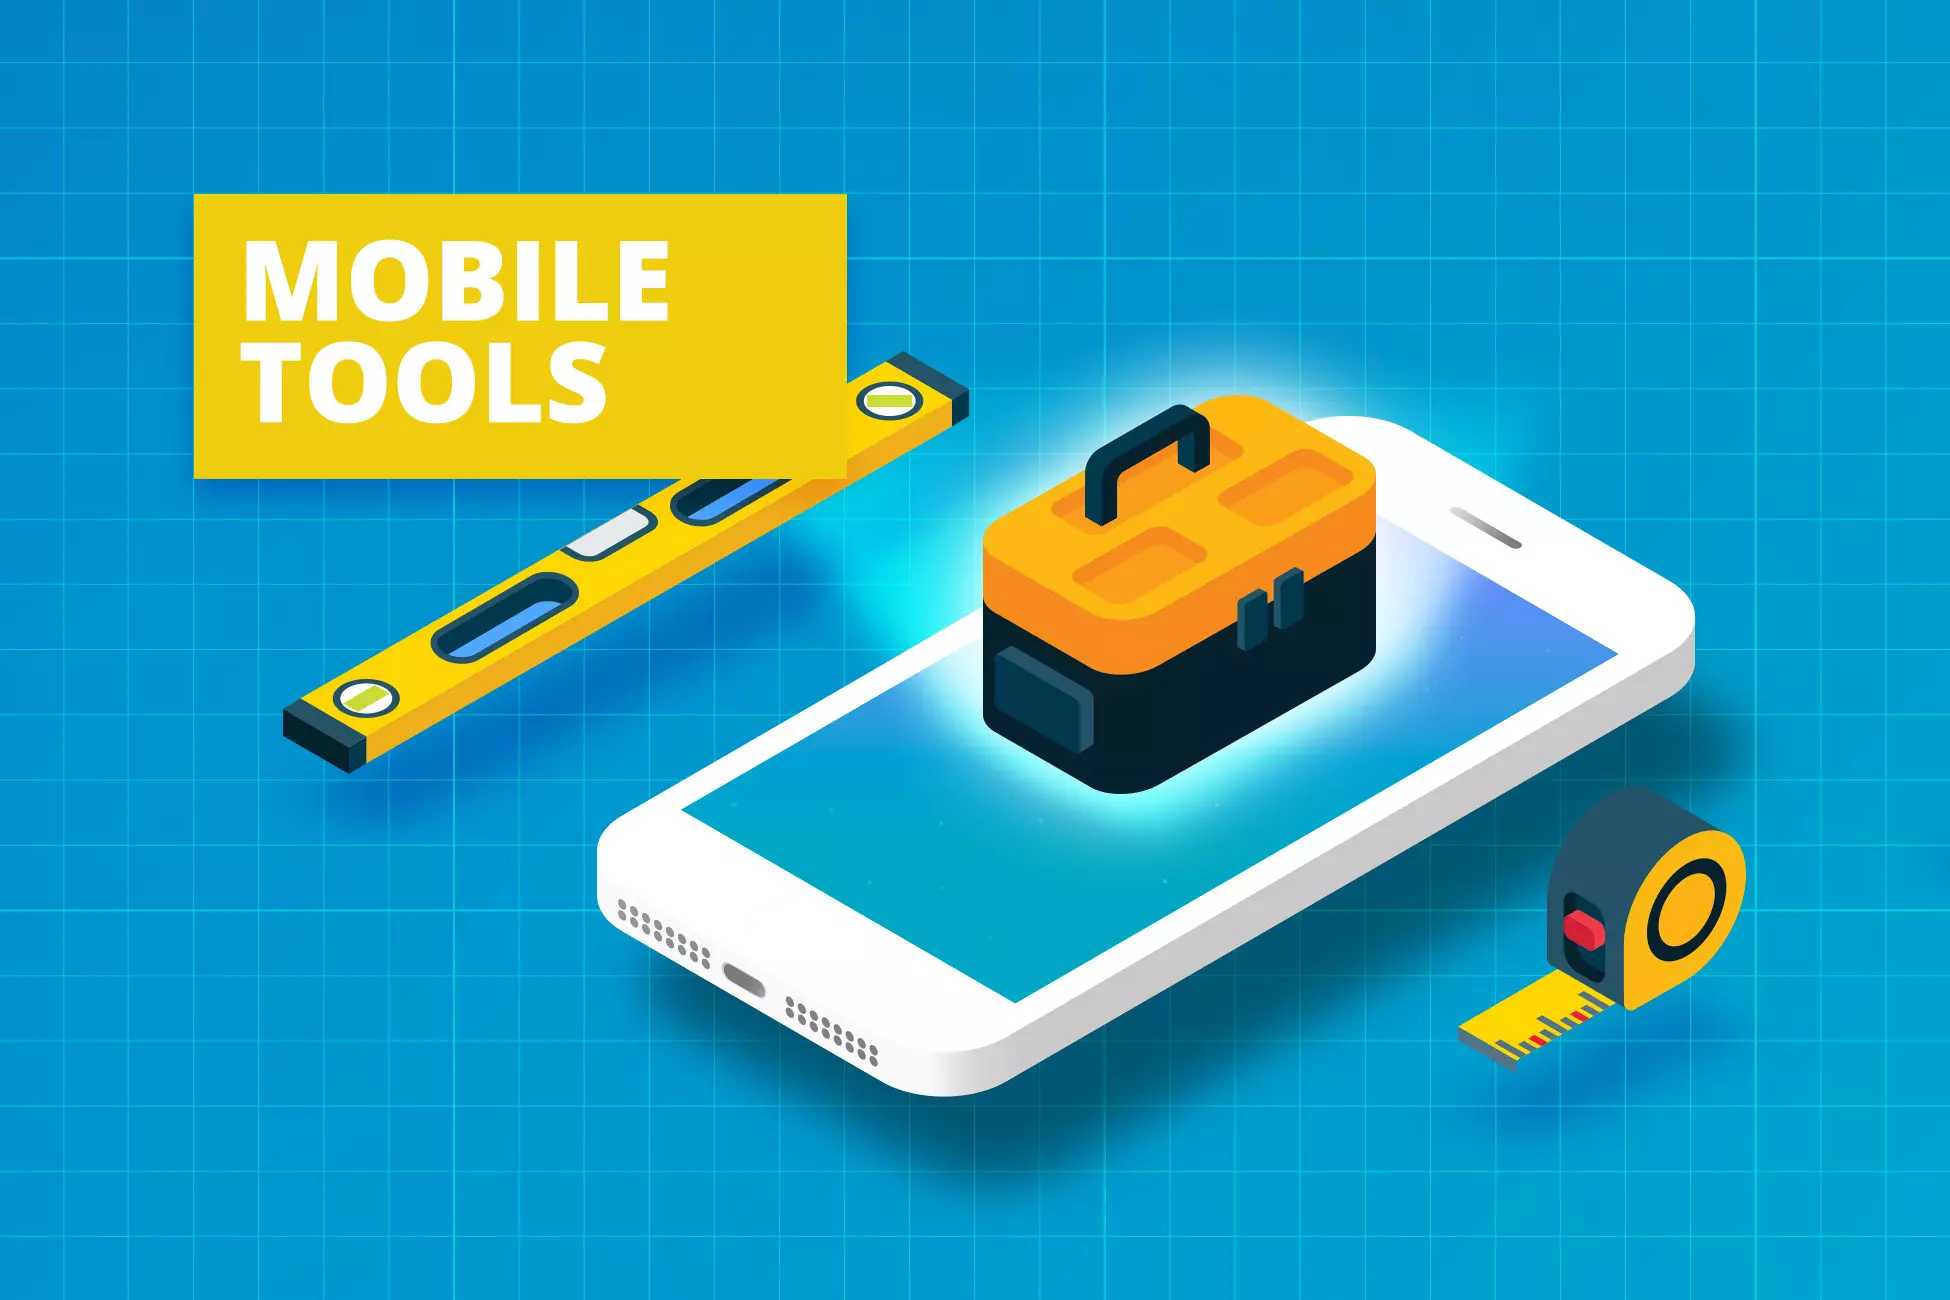 Unity Asset Mobile Tools Complete Game free download